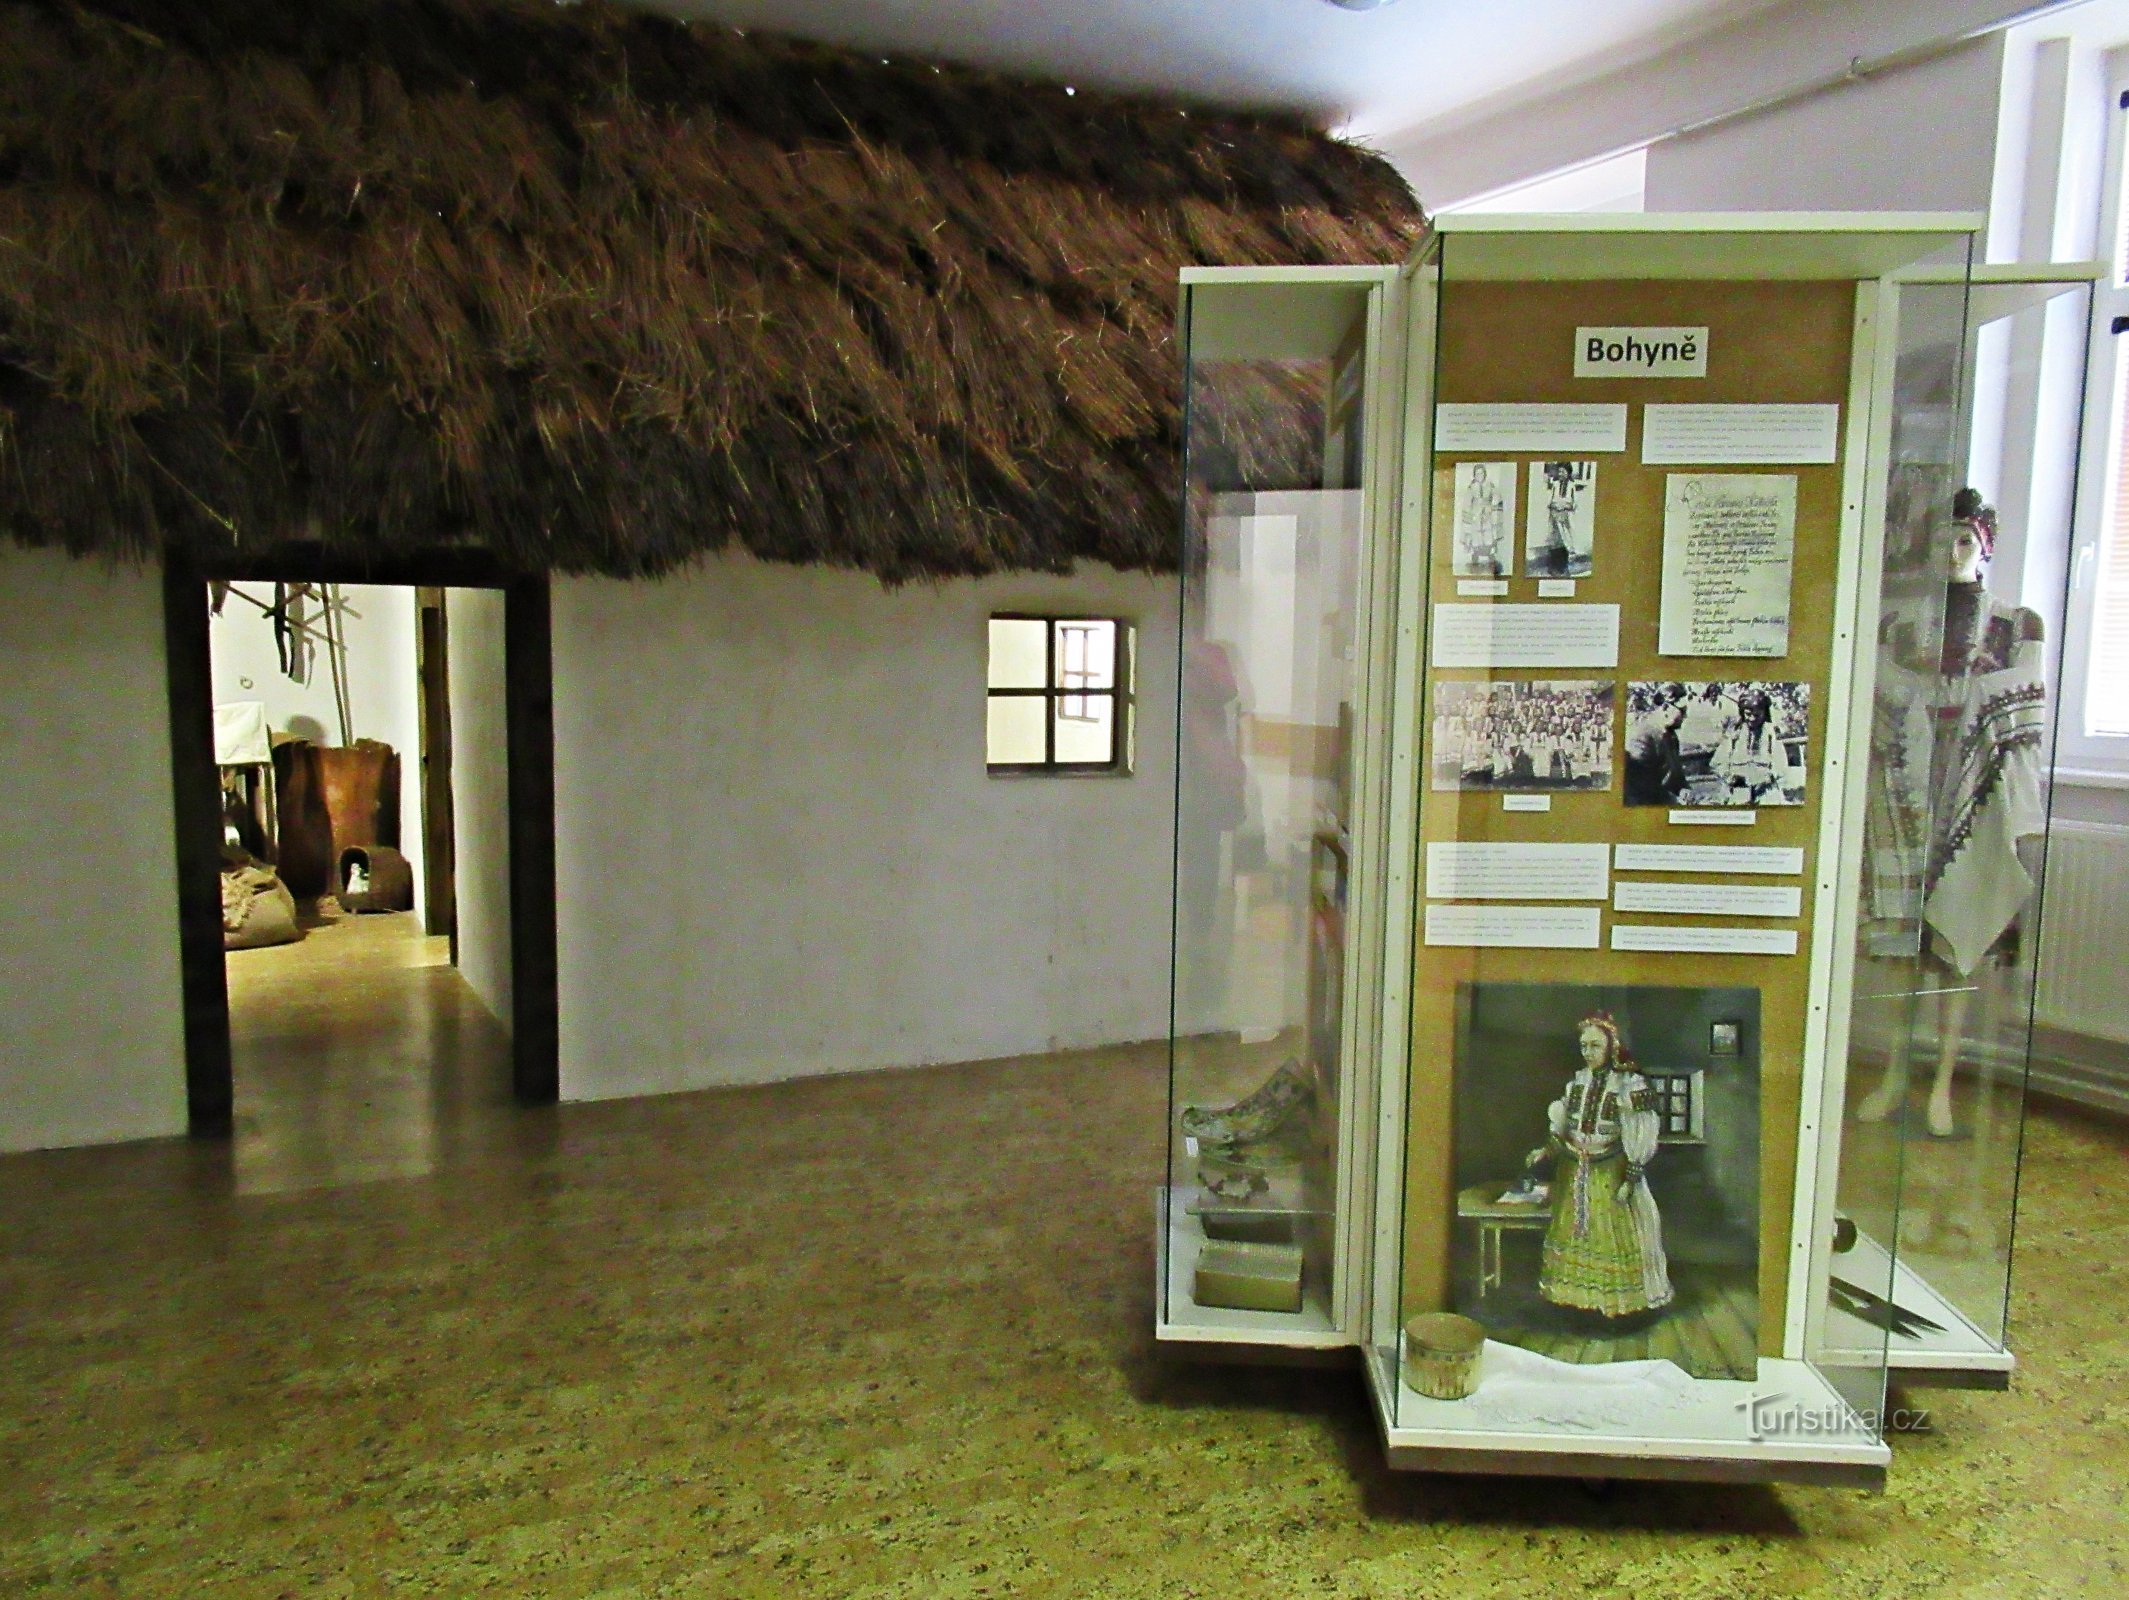 For attractions in the Museum in Bojkovice